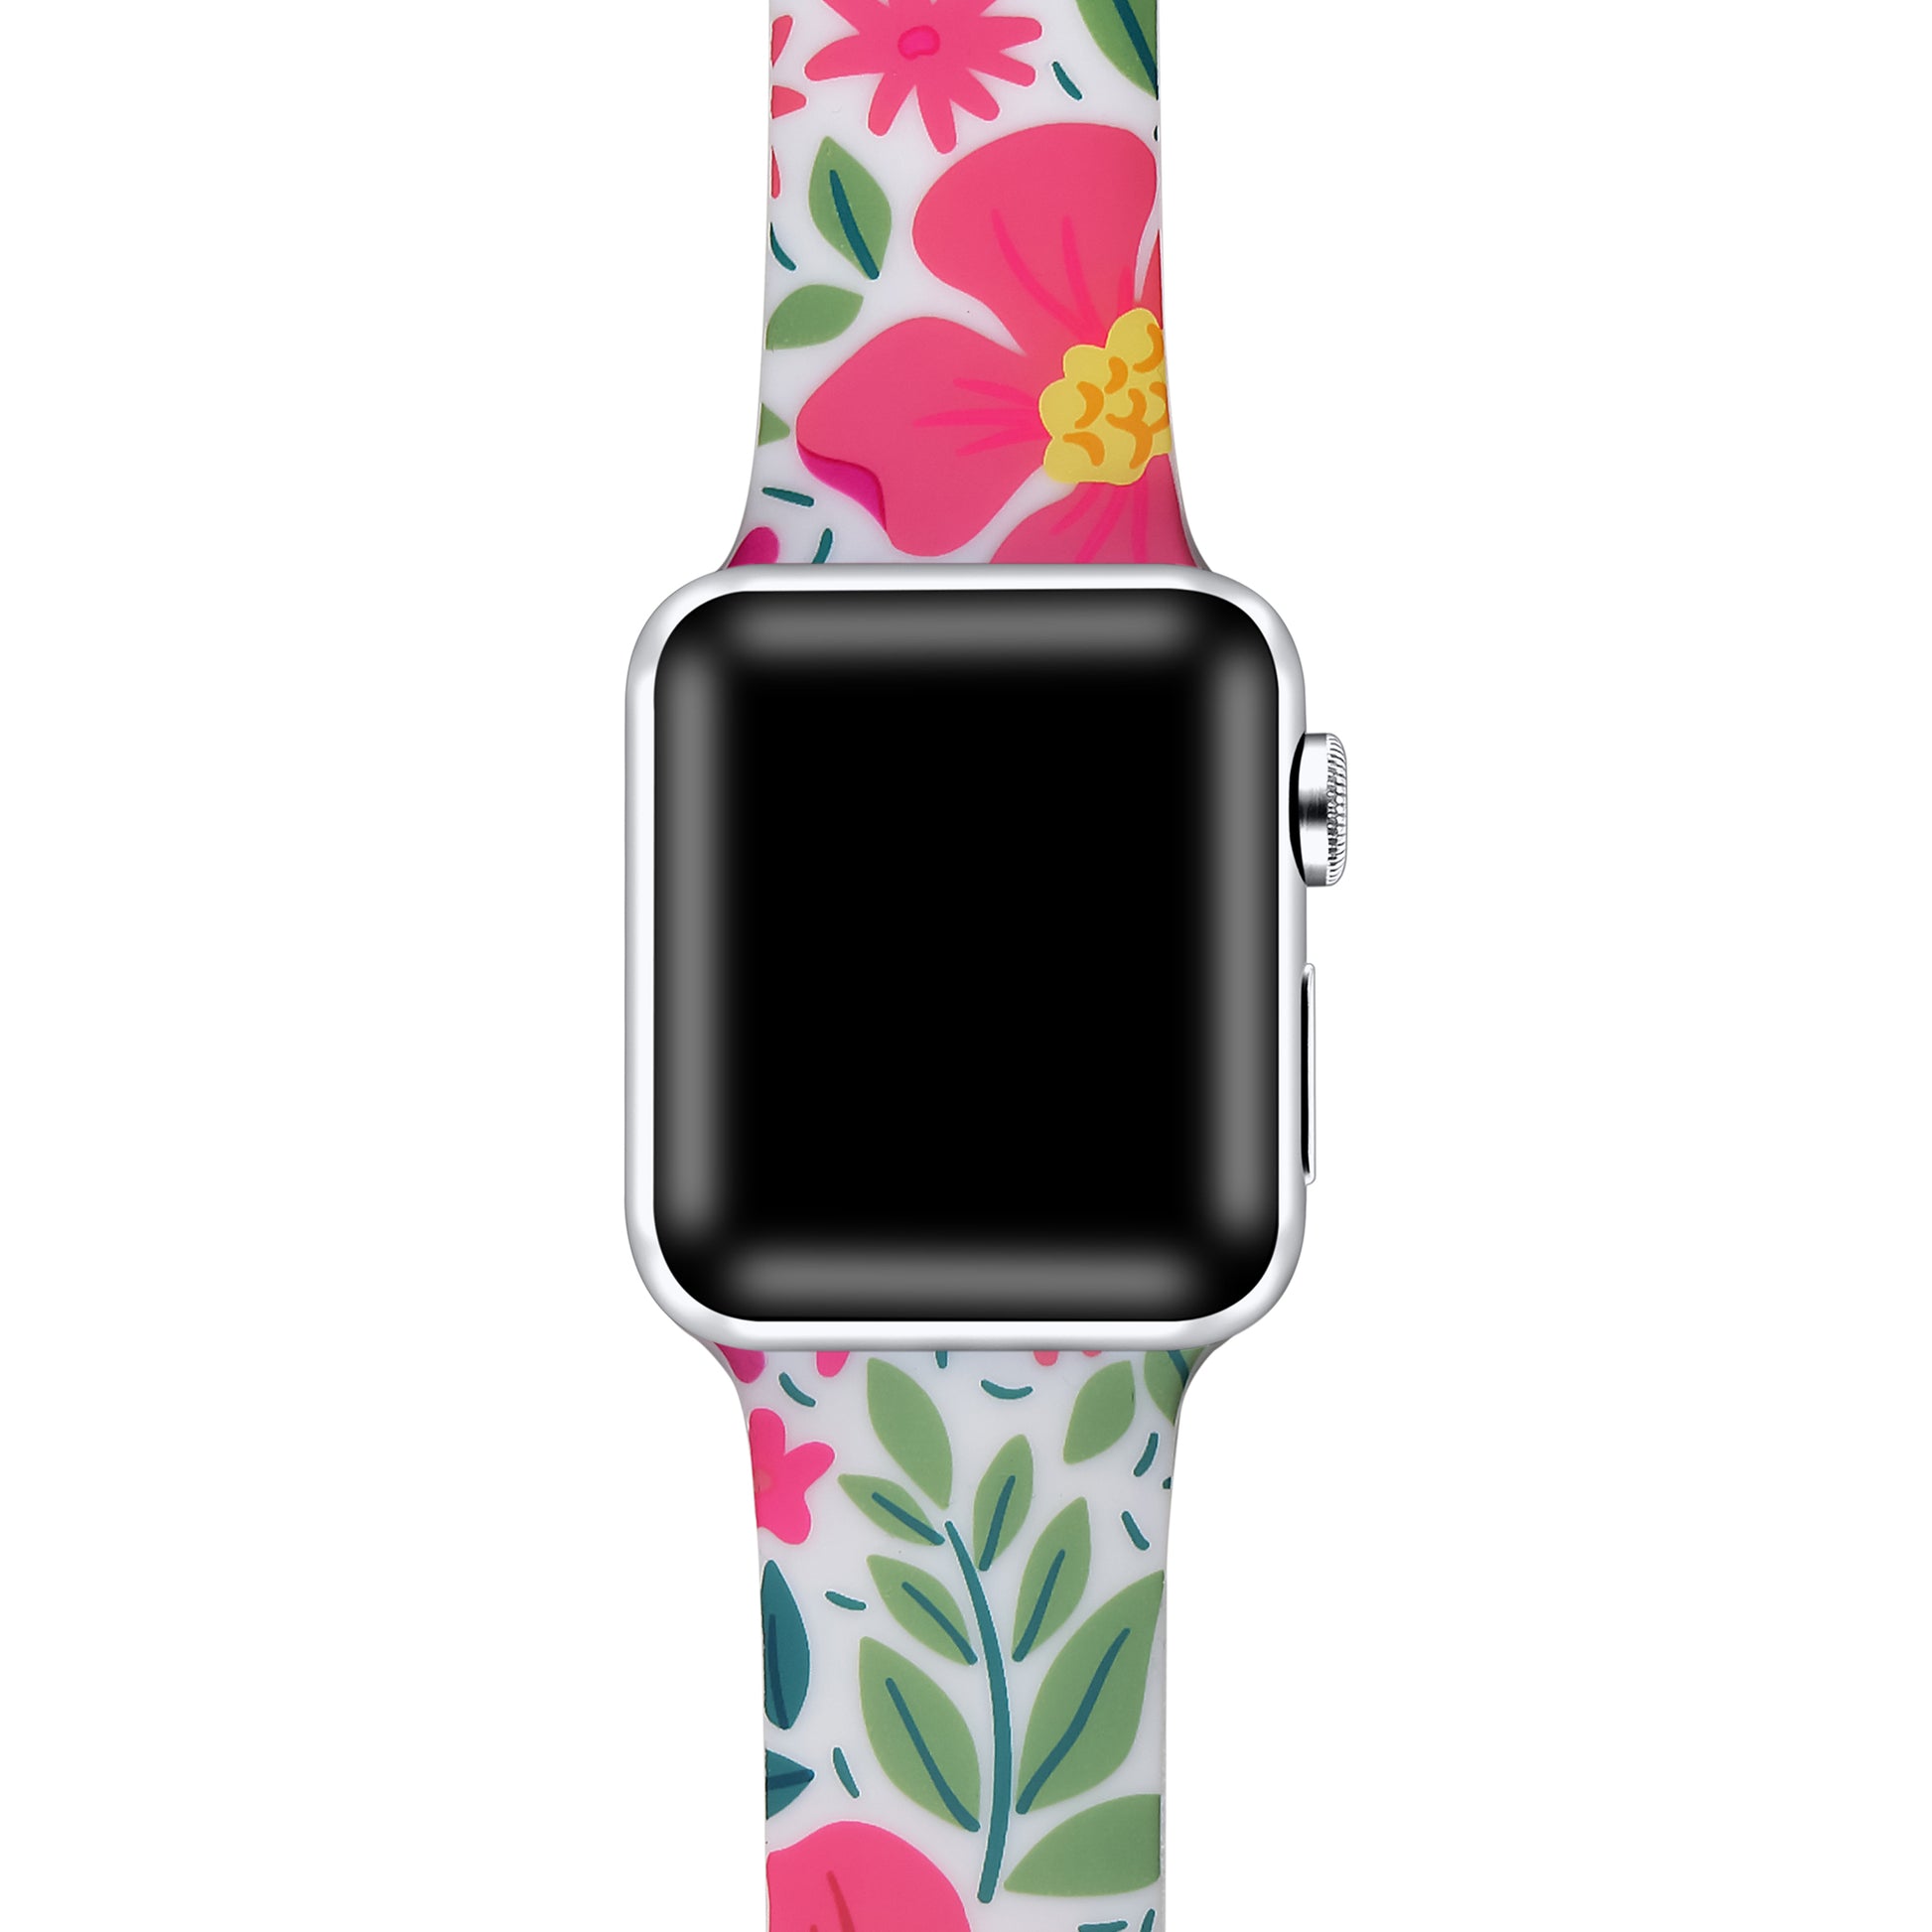 Northwest Pines Etched Silicone Apple Watch Band